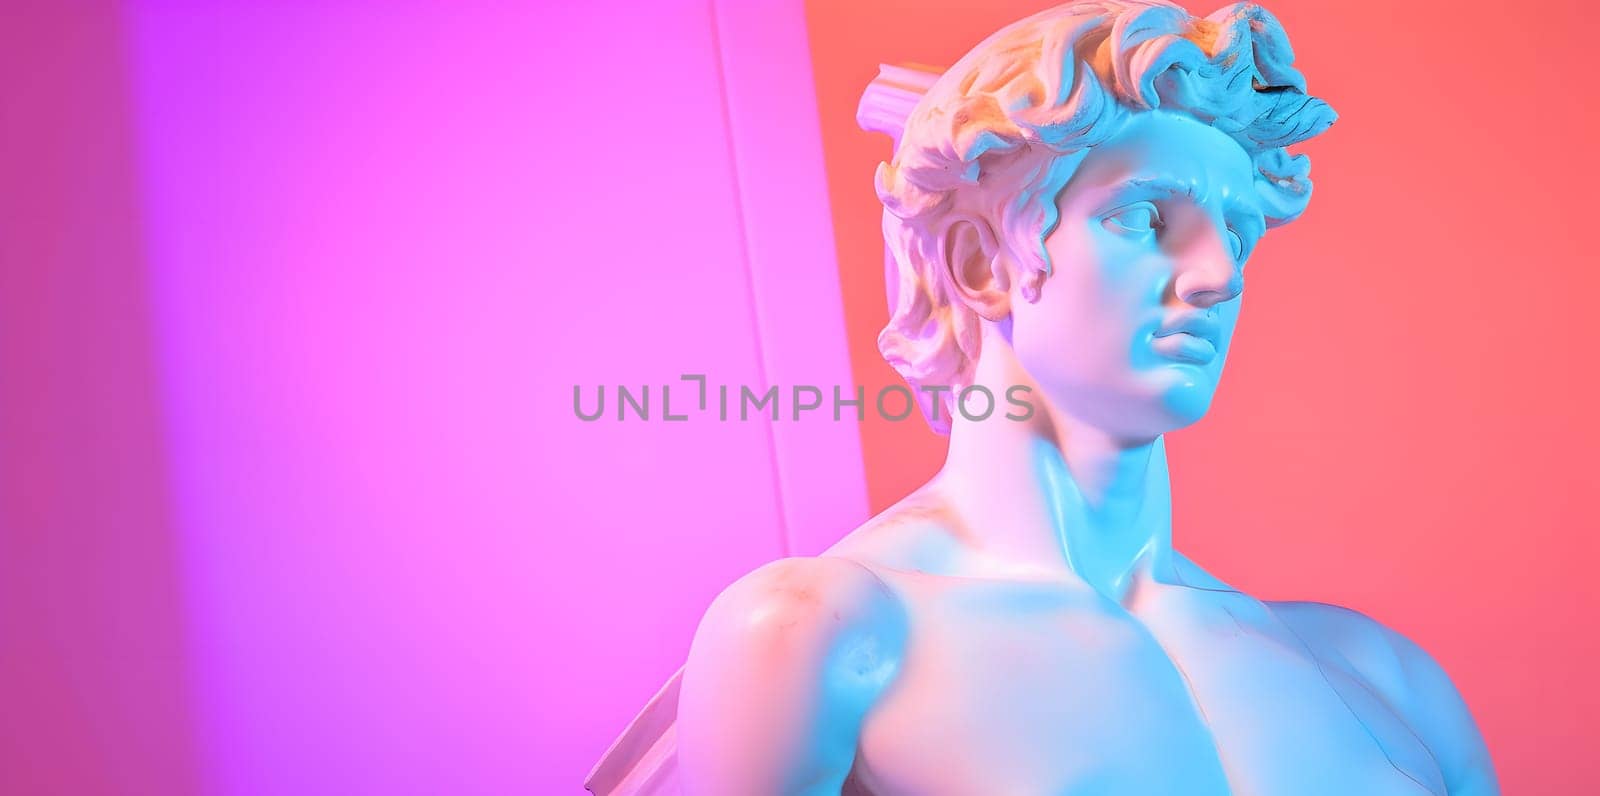 white sculpture of an abstract greek deity brightly lit with neon colors, neural network generated image by z1b